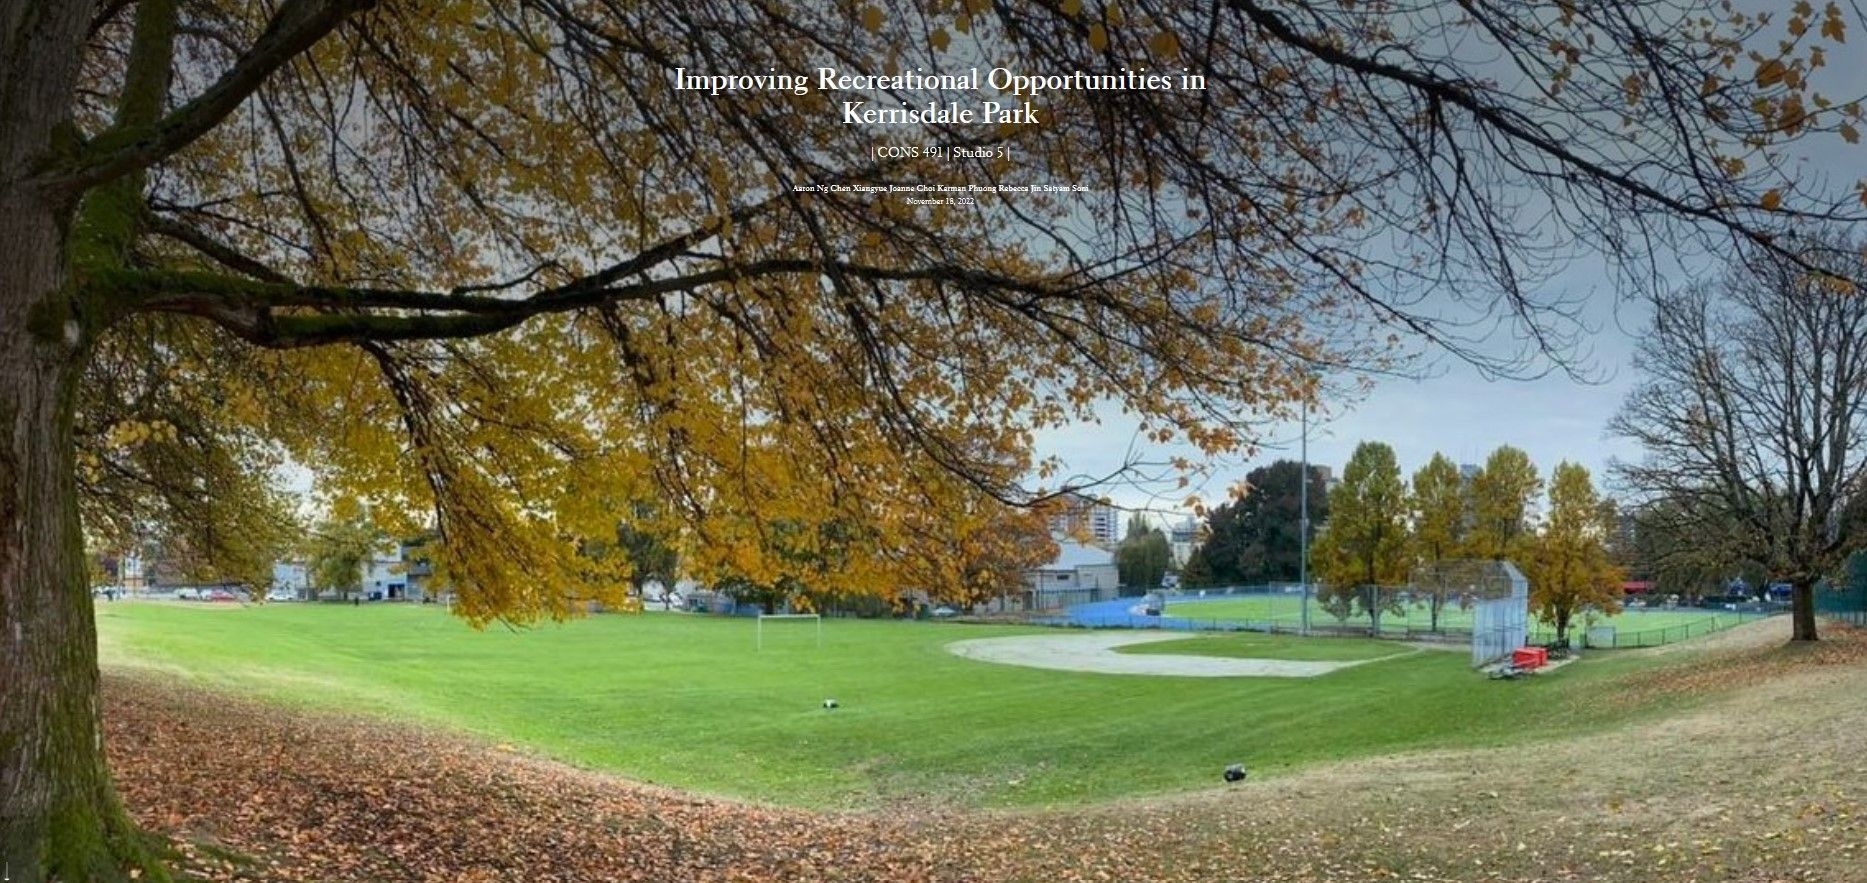 Improving Recreational Opportunities in Kerrisdale Park, Vancouver, BC